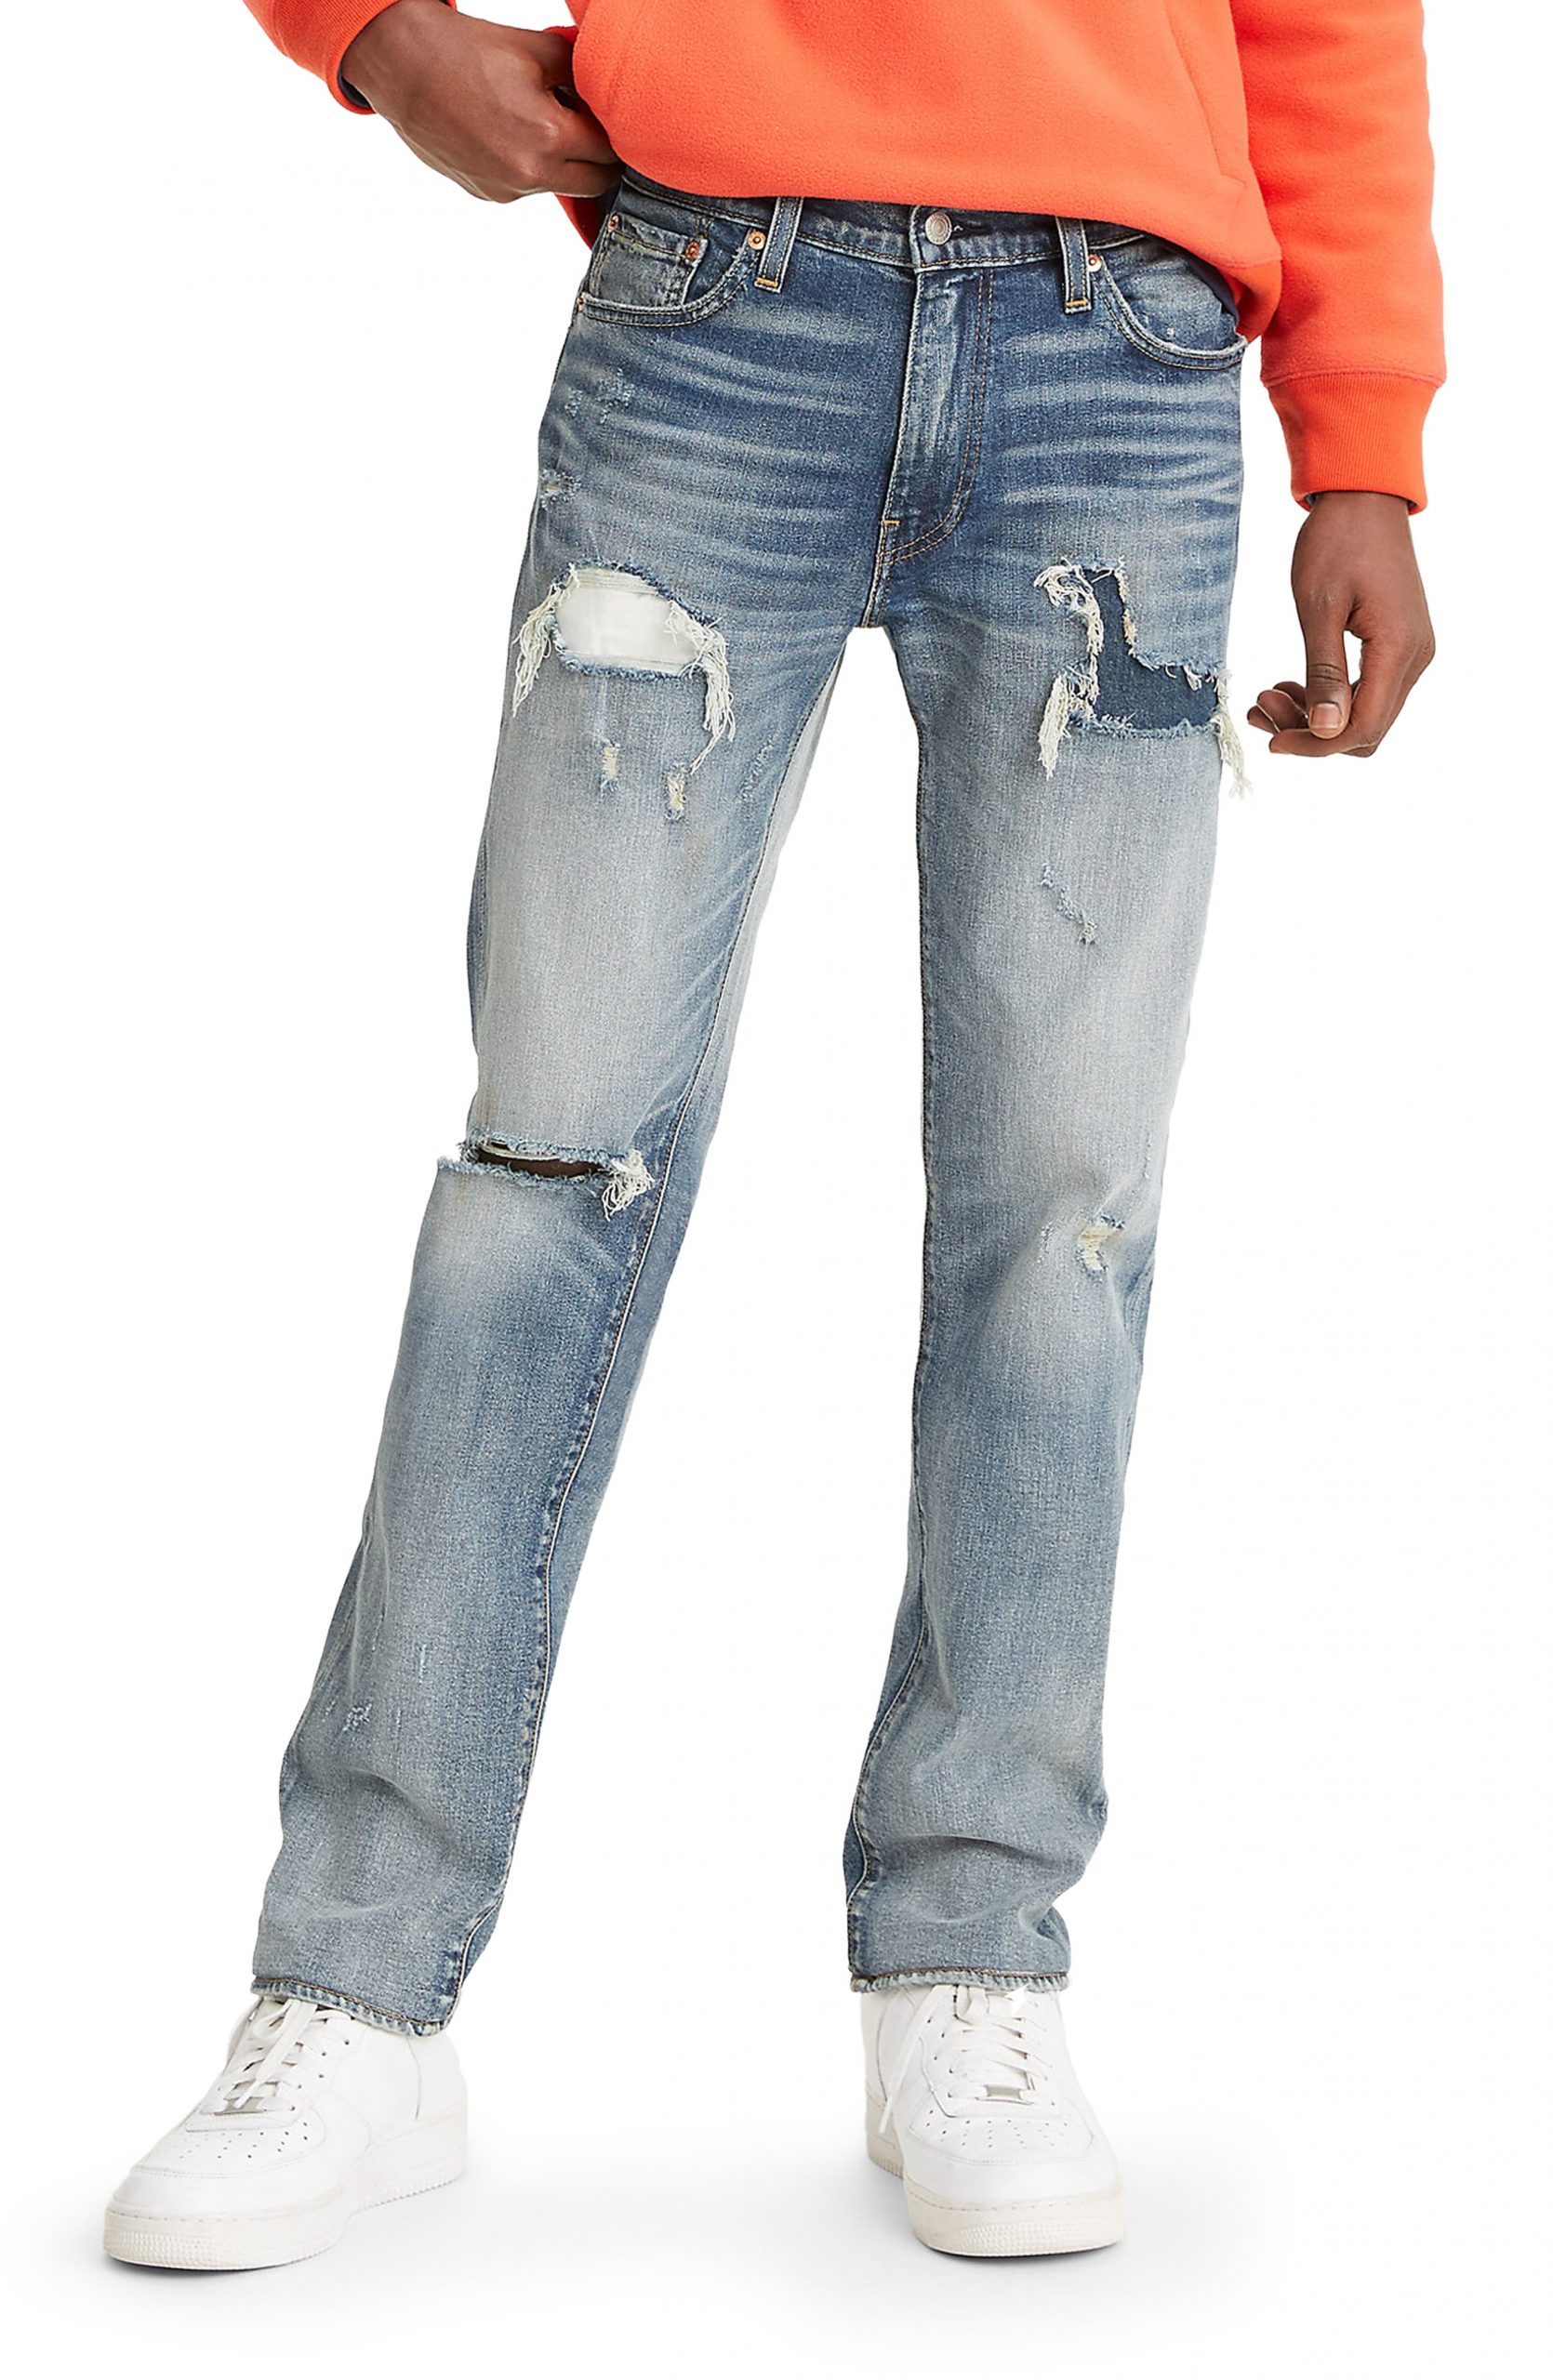 Ripped Slim Fit Jeans, Size 30 x 32 